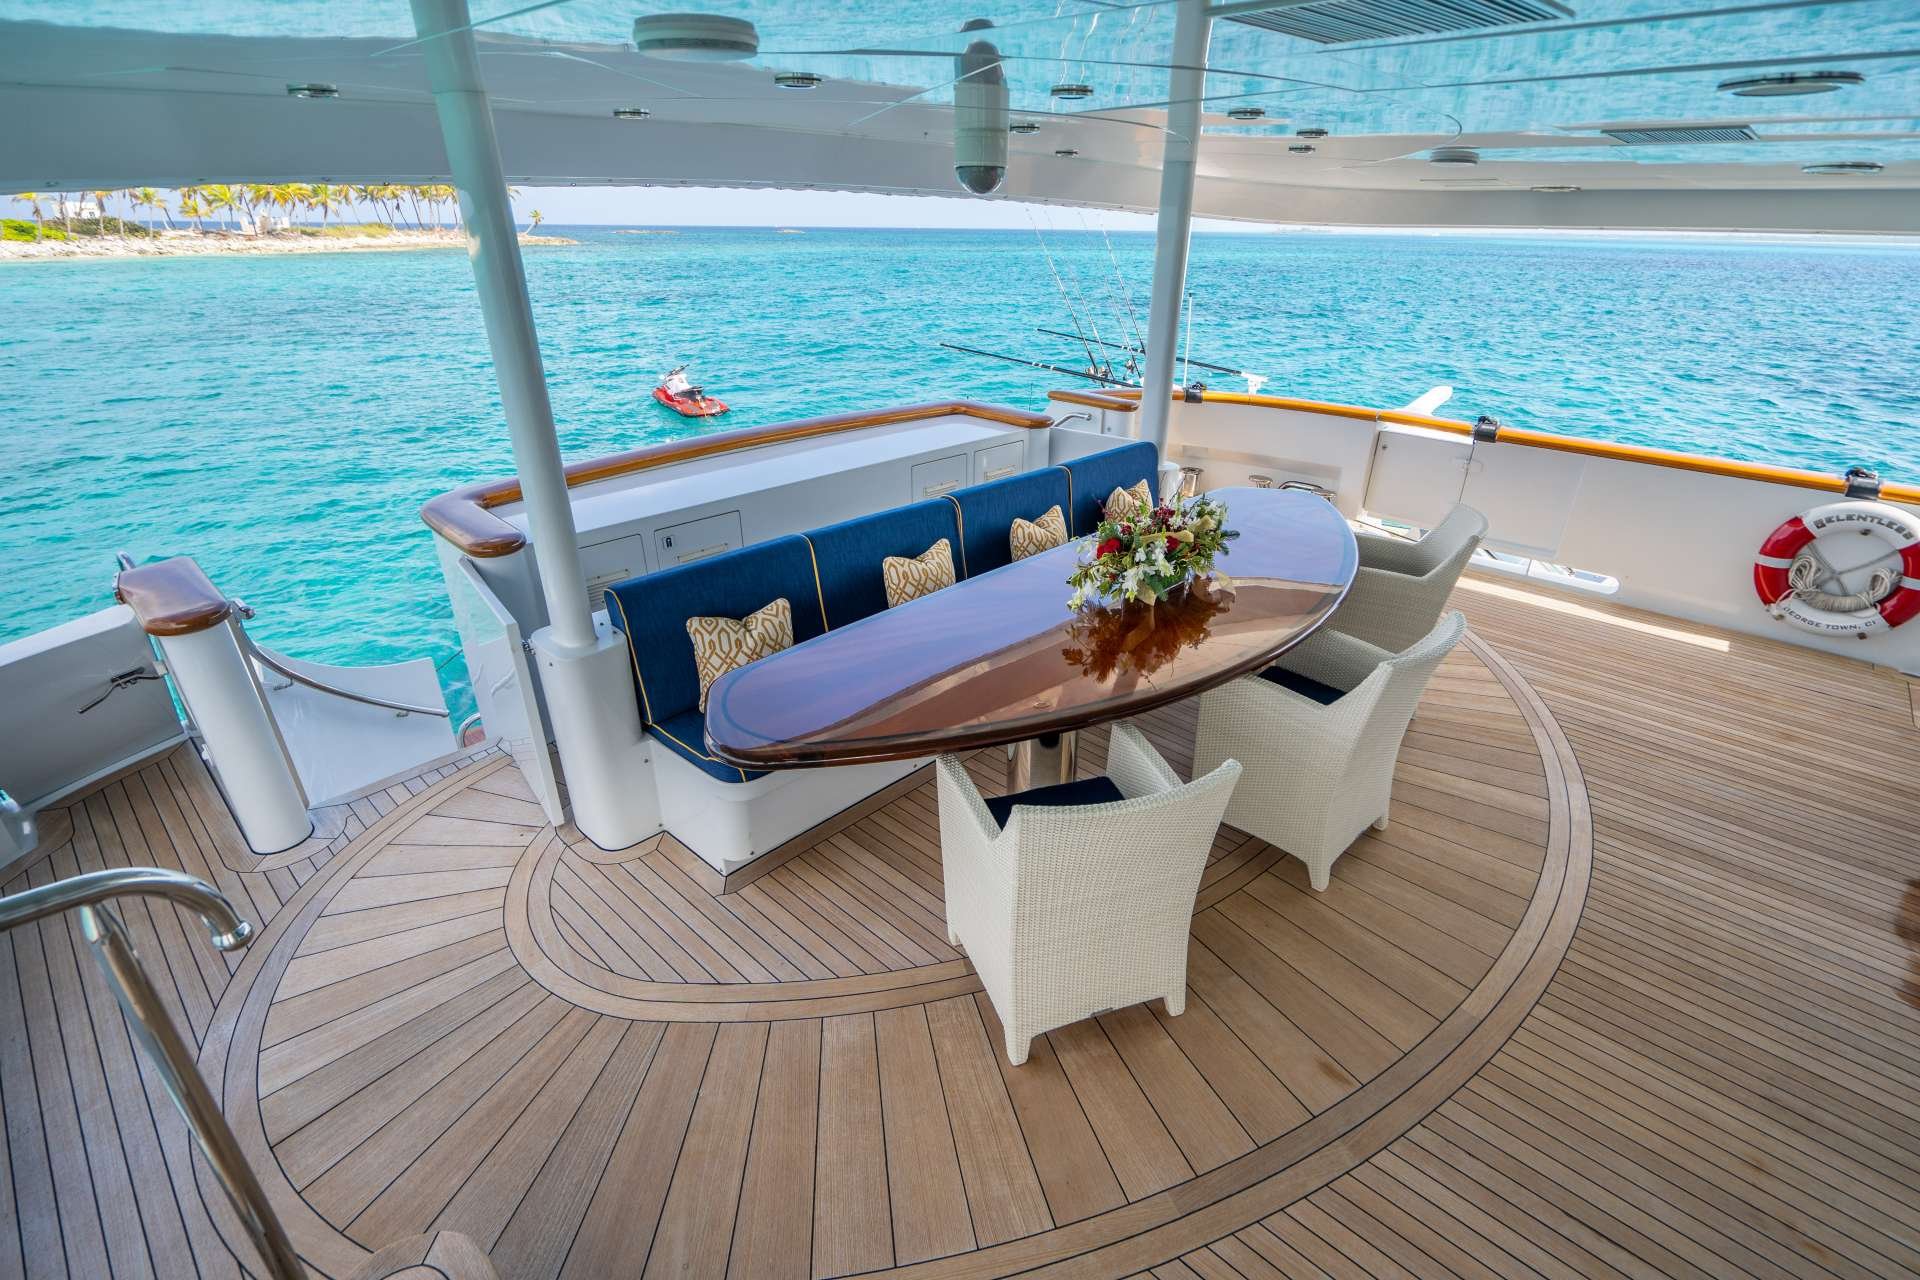 Relentless 145- Seaduction Yacht Charters